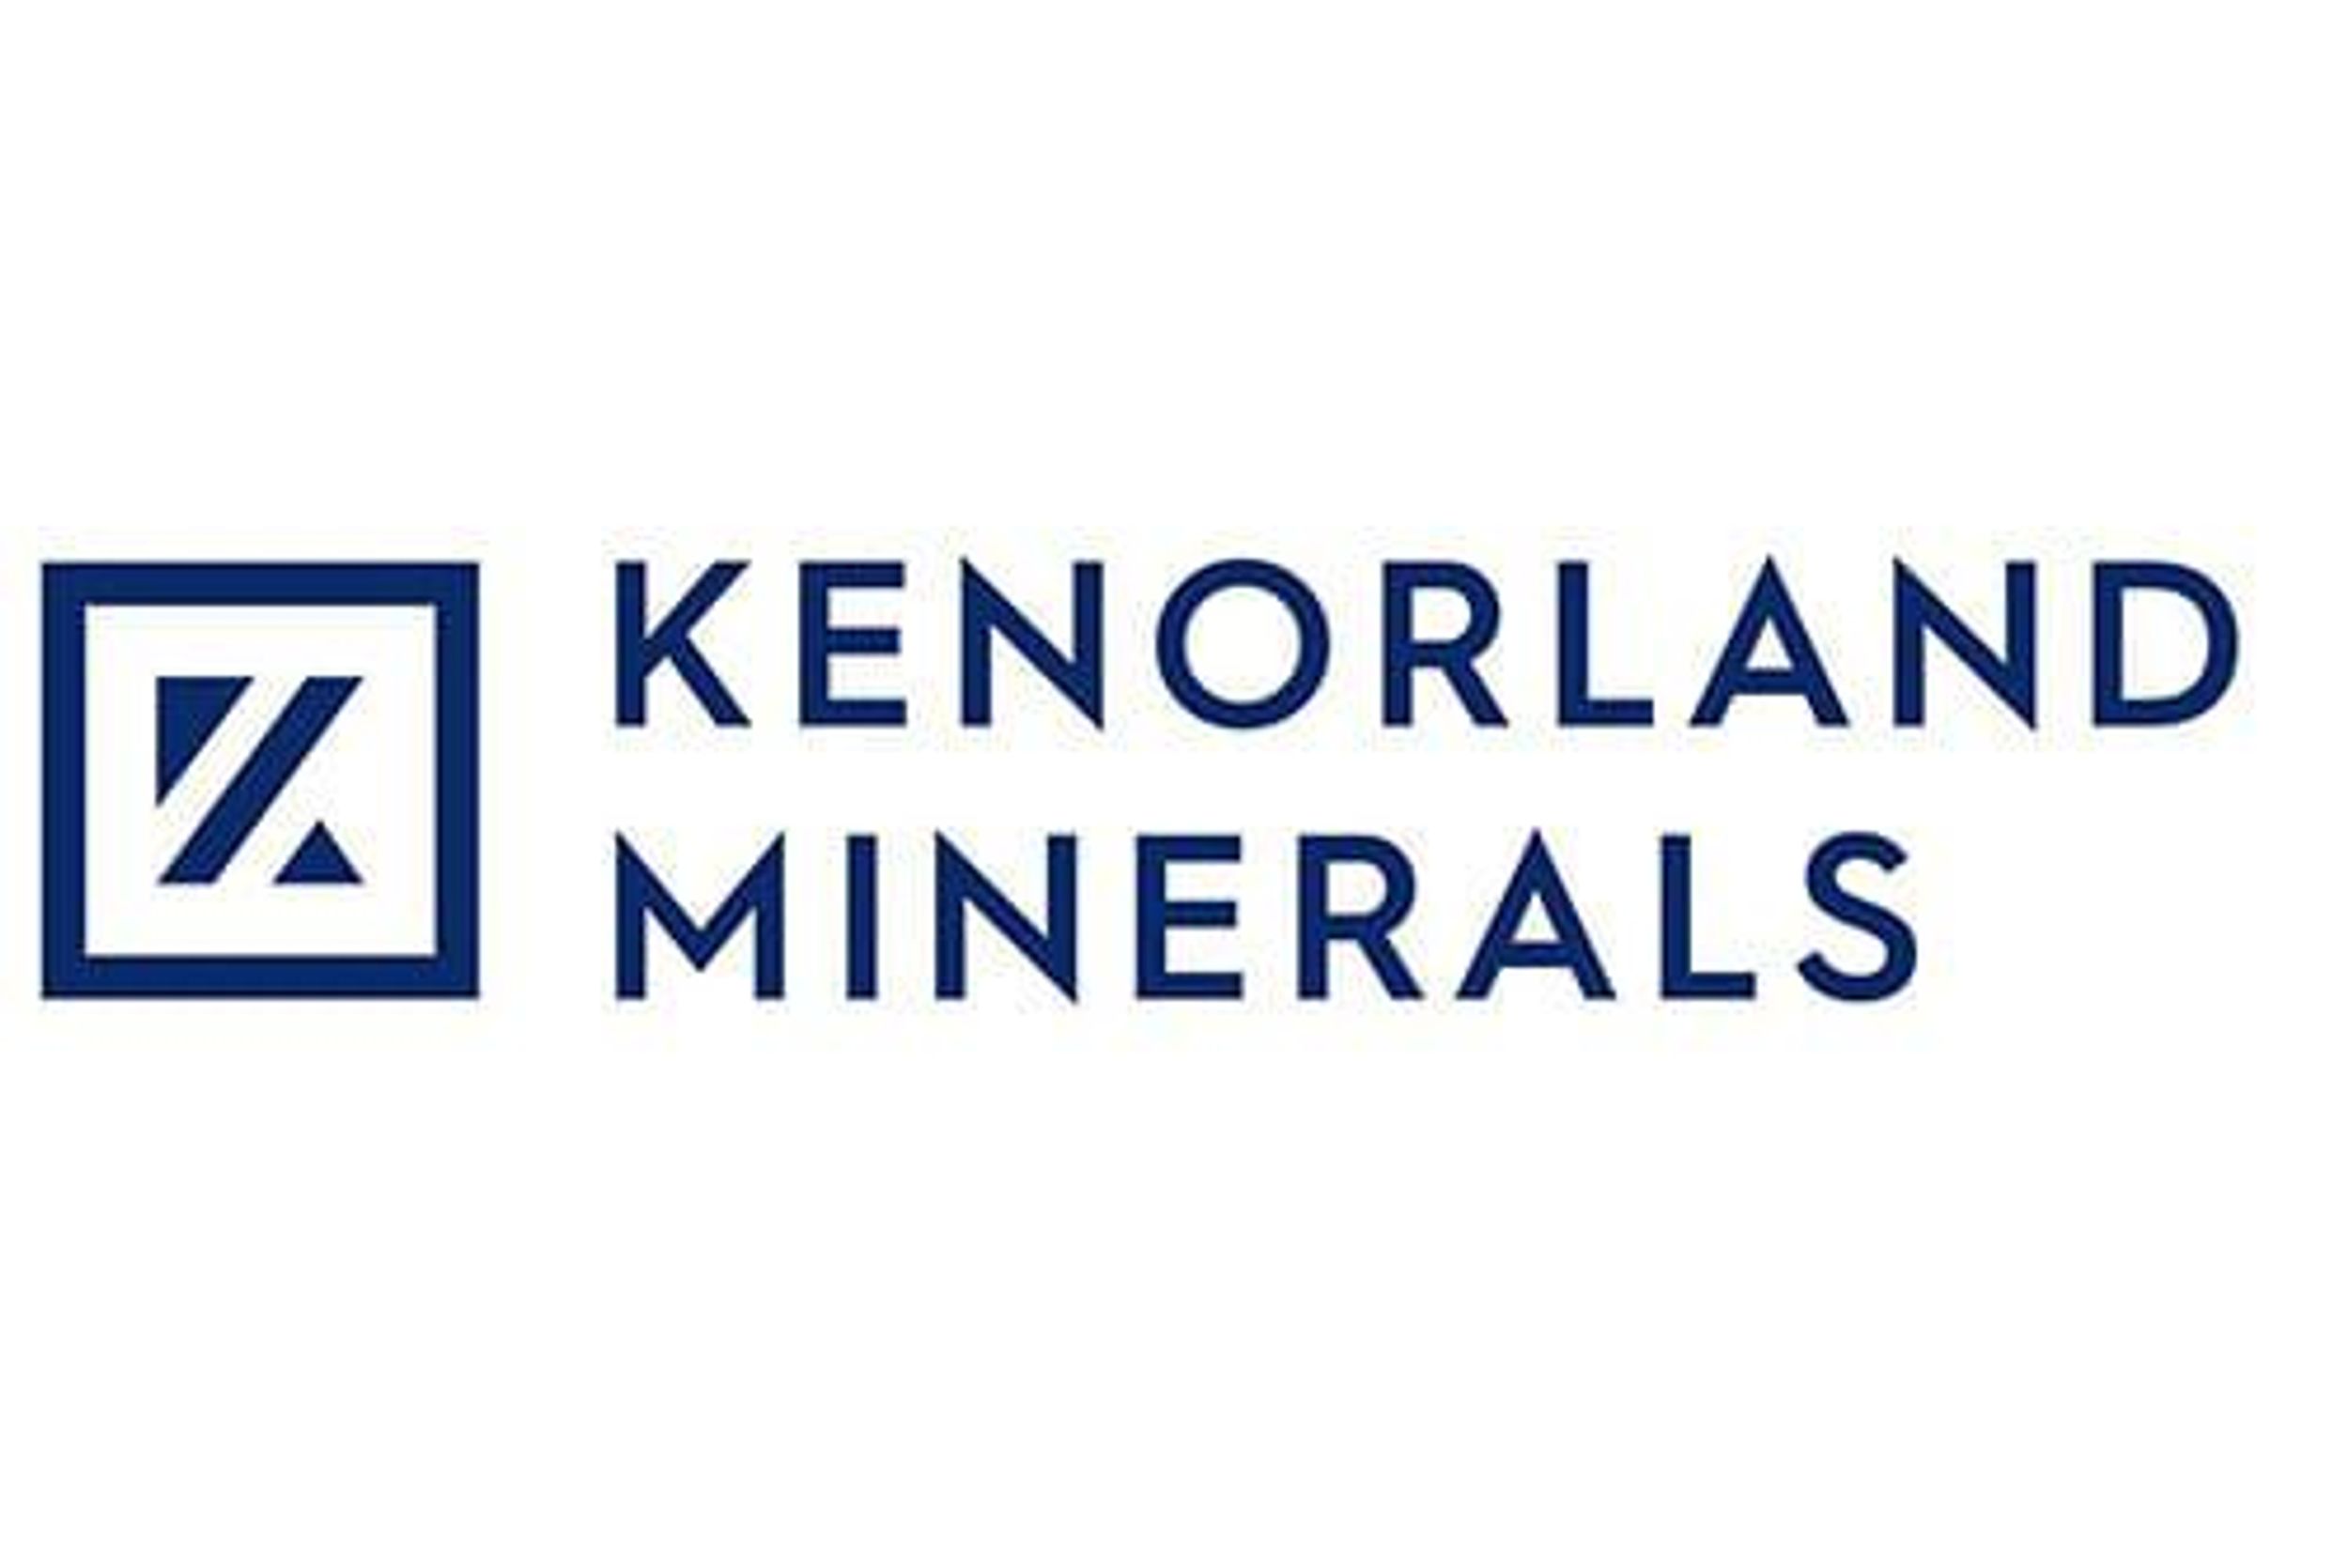 Kenorland Options Hunter Project to Centerra Gold Inc